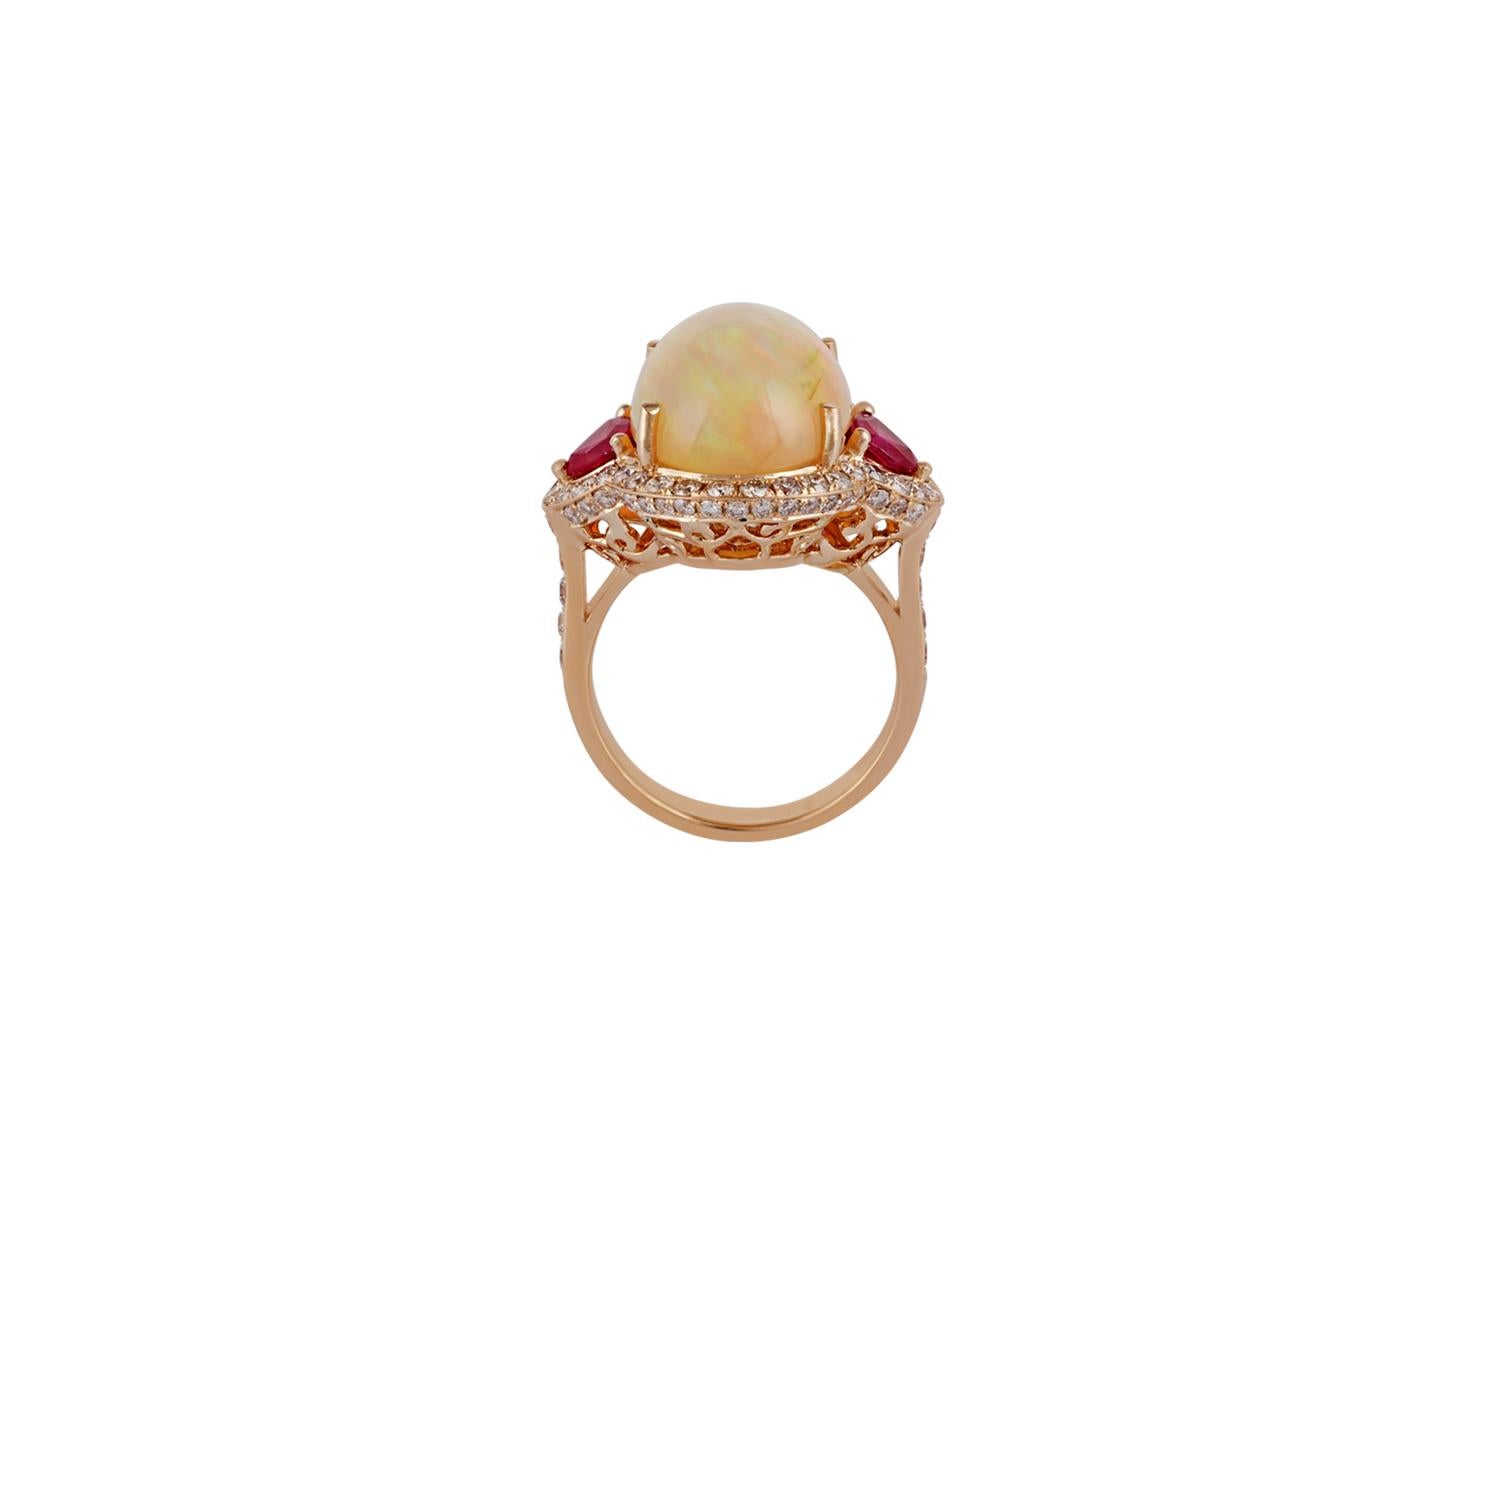 This is an exclusive & designer ring studded in 18k yellow gold features 1 piece of opal weight 7.81 carat with 2 pieces of ruby weight 0.85 carat & 84 pieces of diamonds weight 1.18 carat, this entire ring is studded in 18k yellow gold weight 7.94